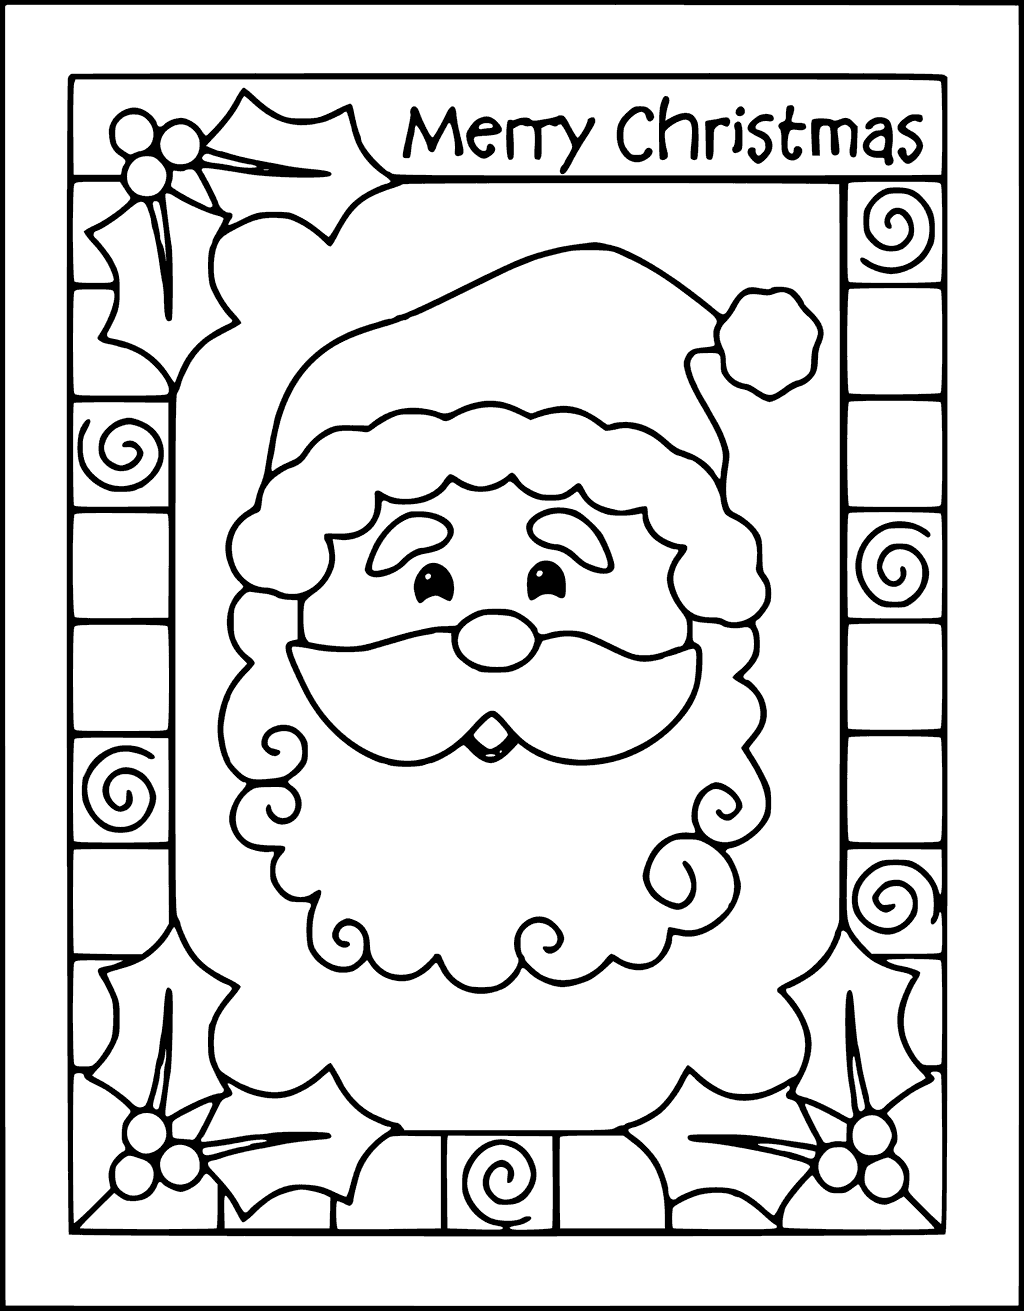 christmas-card-printable-coloring-pages-at-getcolorings-free-printable-colorings-pages-to